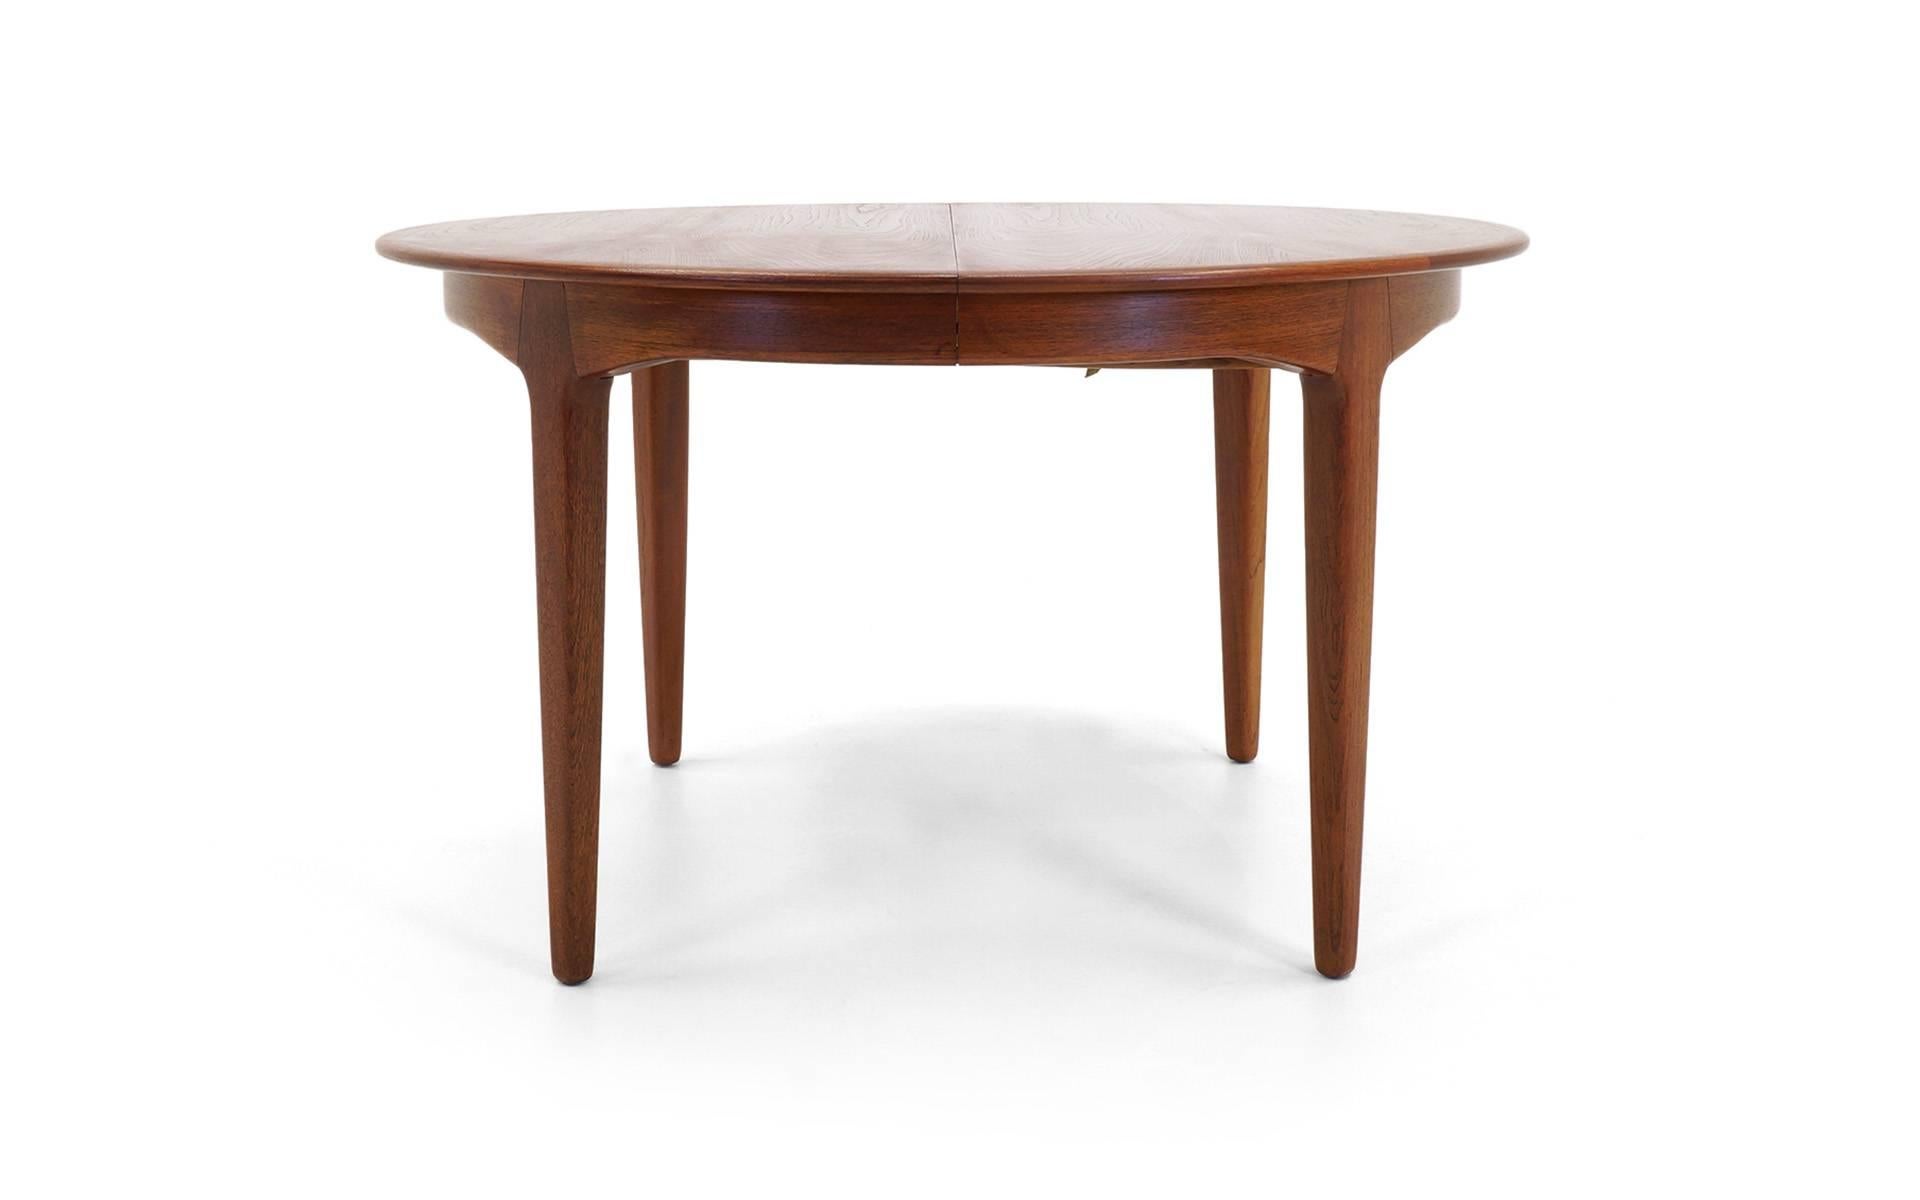 Outstanding combination of versatility and quality we have seen in a dining table. The Teak wood is in excellent condition. Begins 48" round and has four 20" leaves so extends to 10 1/2 feet. And the leaves are skirted so you have a